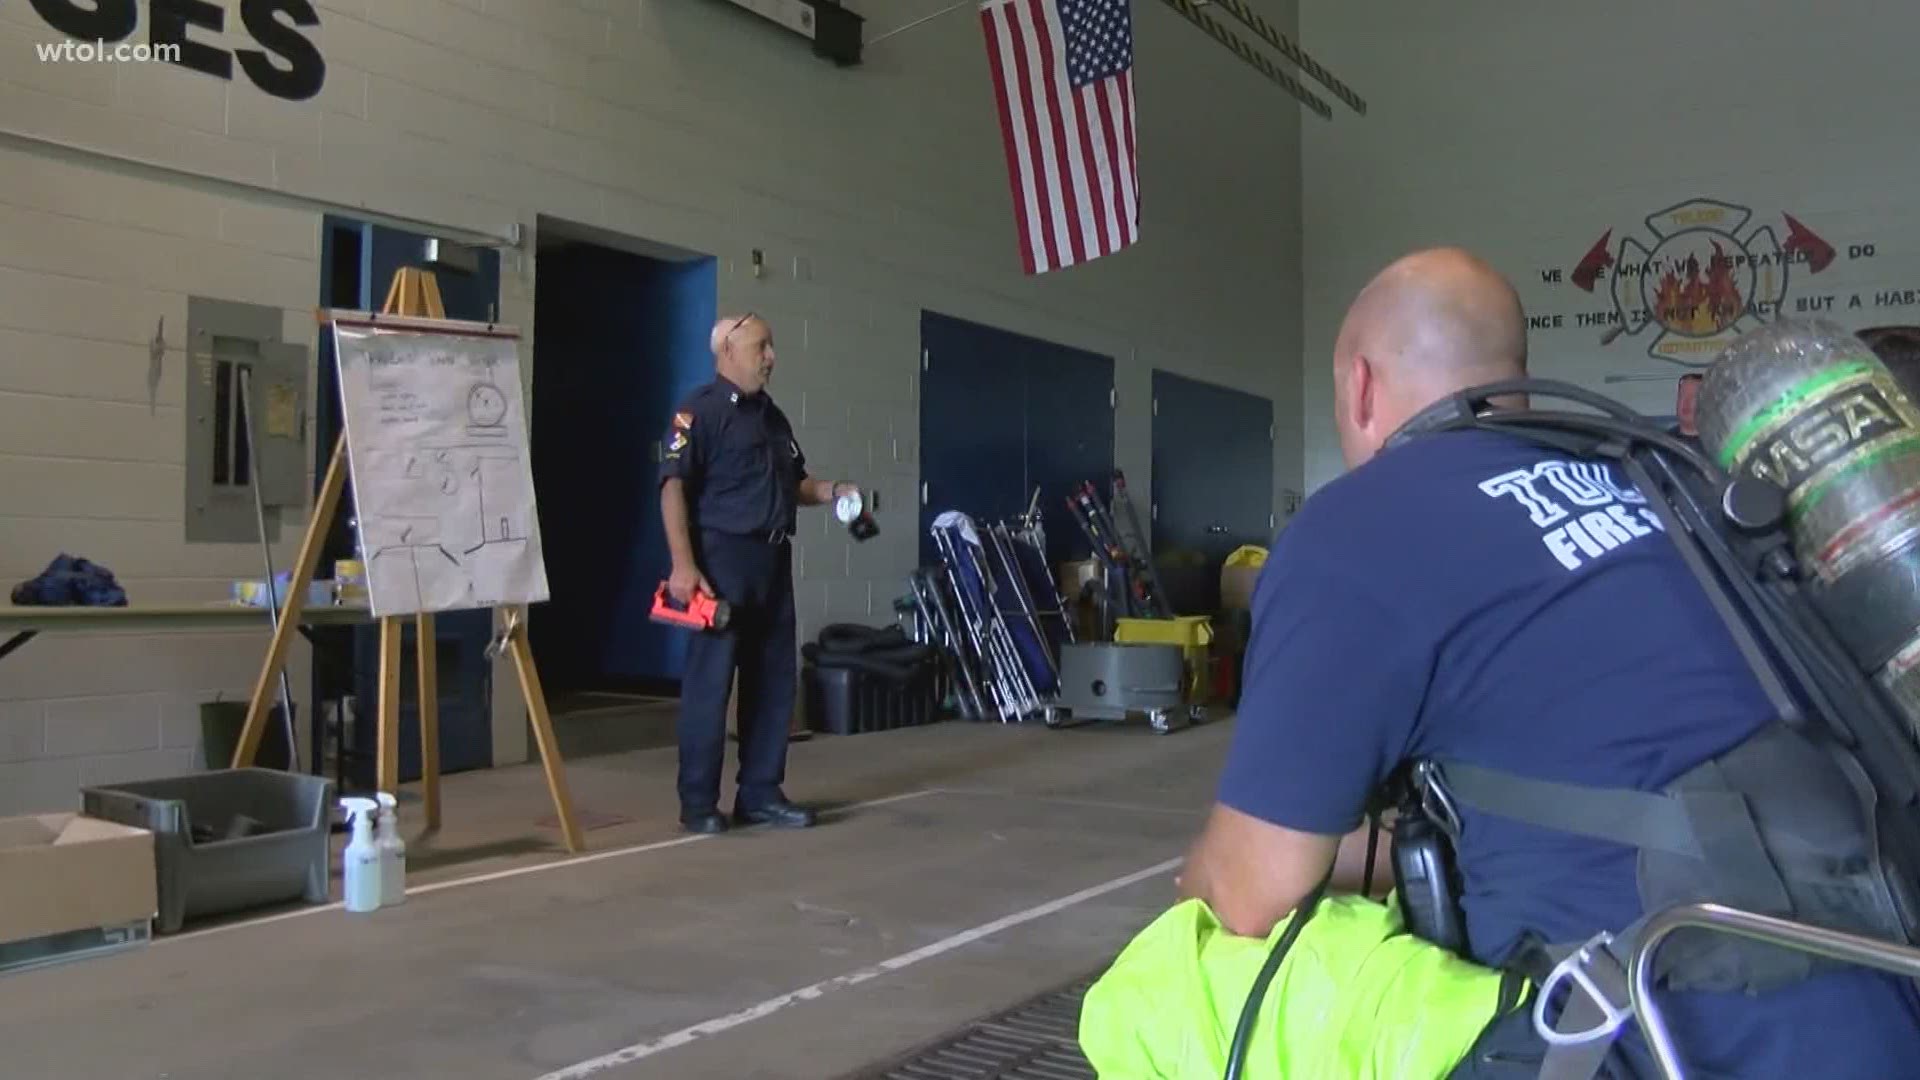 The four-hour, hands-on training is part of Toledo fire's annual refresher course to keep the firefighters up to date with trends and equipment.